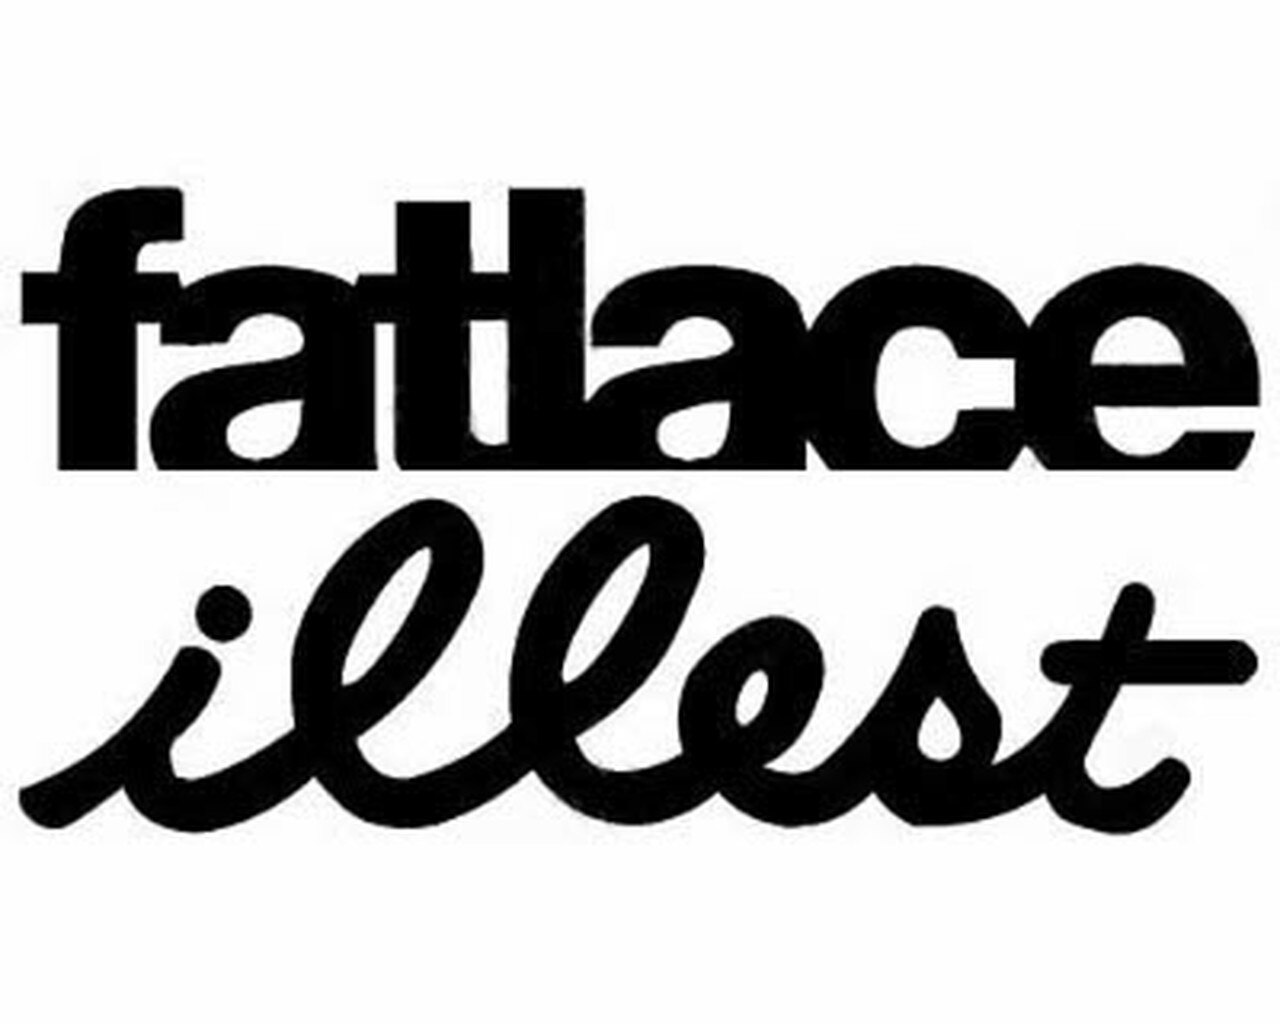 Fatlace Illest Sticker On Car, wallpaper, background picture, wallpaper dow...